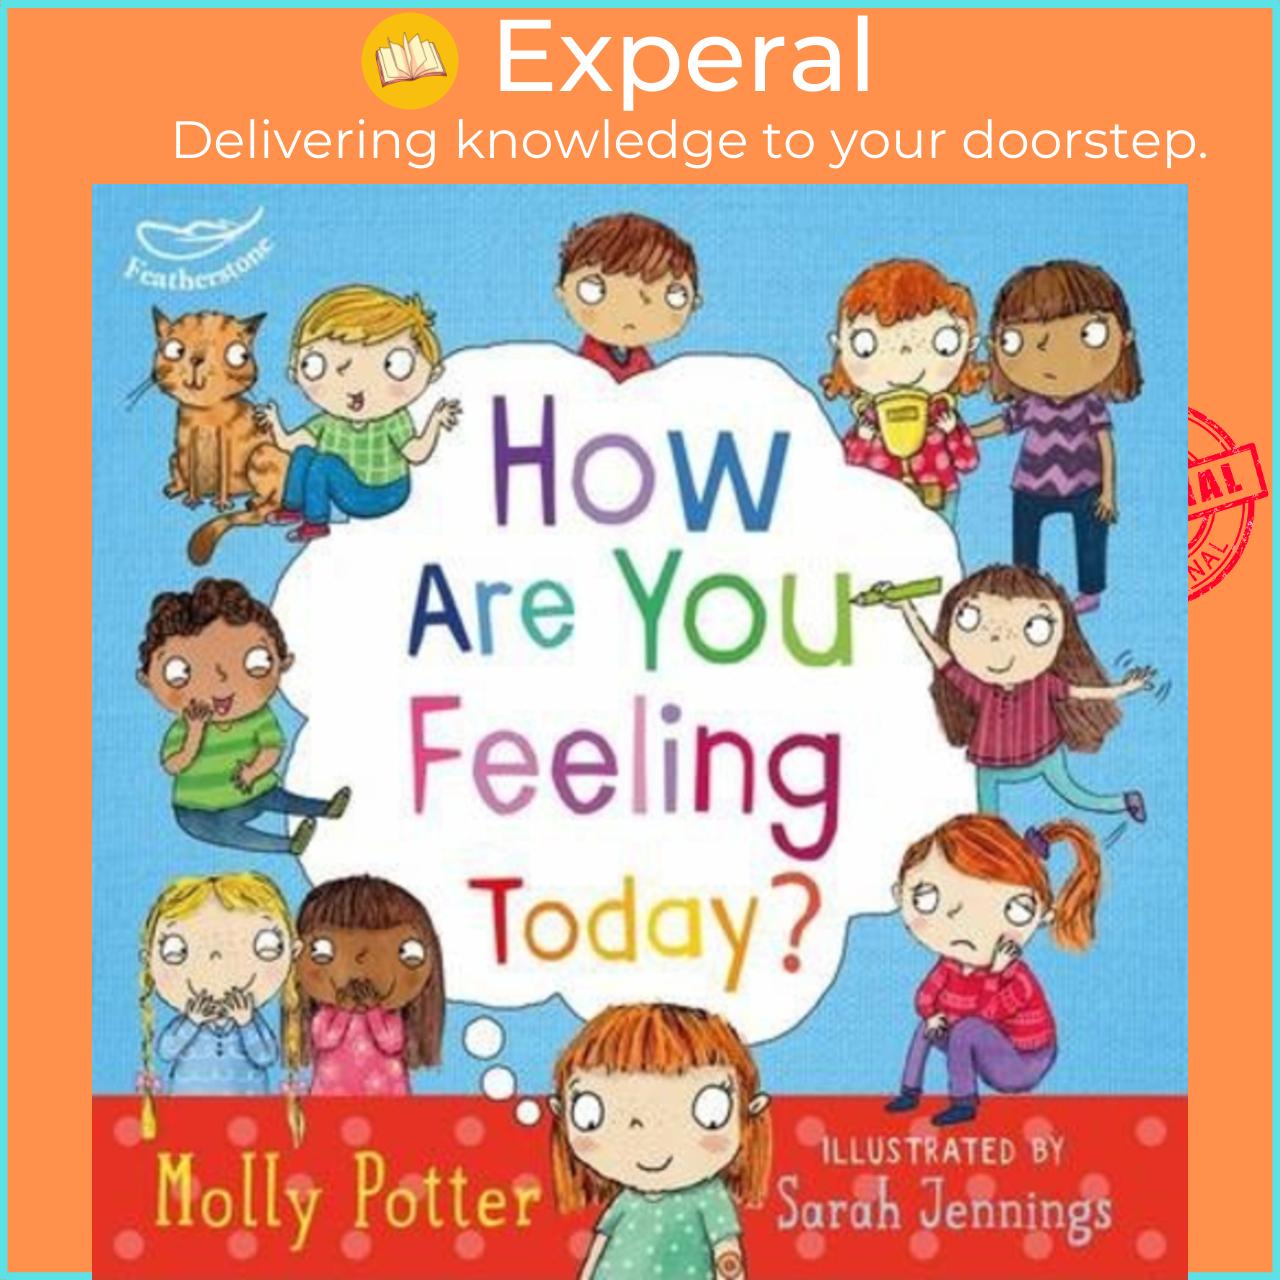 Sách - How are you feeling today? by Molly Potter (UK edition, hardcover)